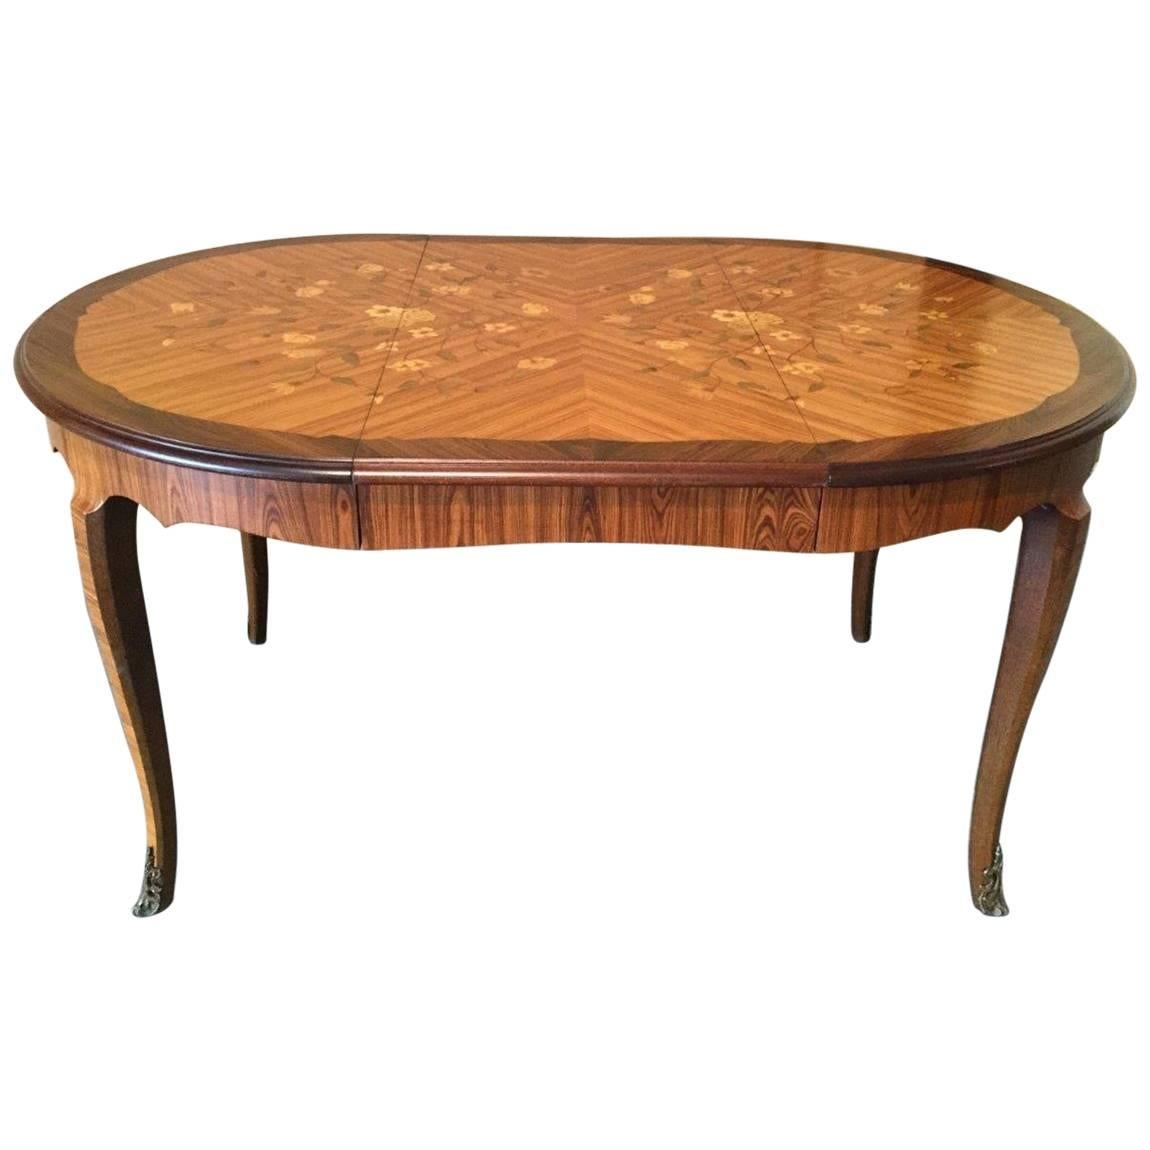 Superb French Oval or Round Mixed Wood Floral Inlay Dining Table